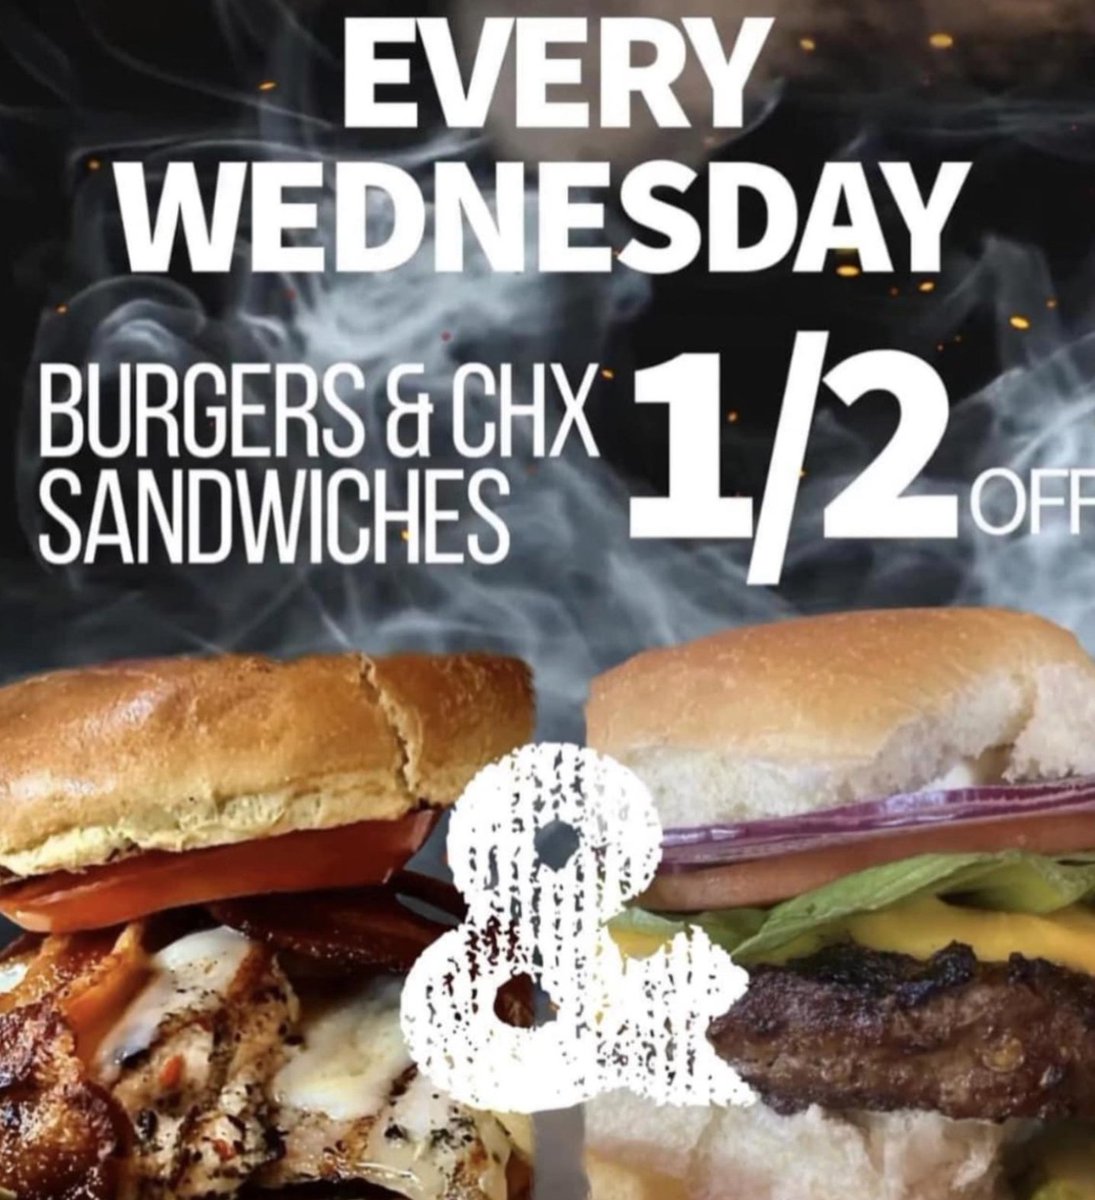 Make plans to join us for our $7 burgers or chicken sandwiches with fries!  
#CladdaghPub #WednesdaySpecial #cantonmd #burgersandfries #baltimoresbest